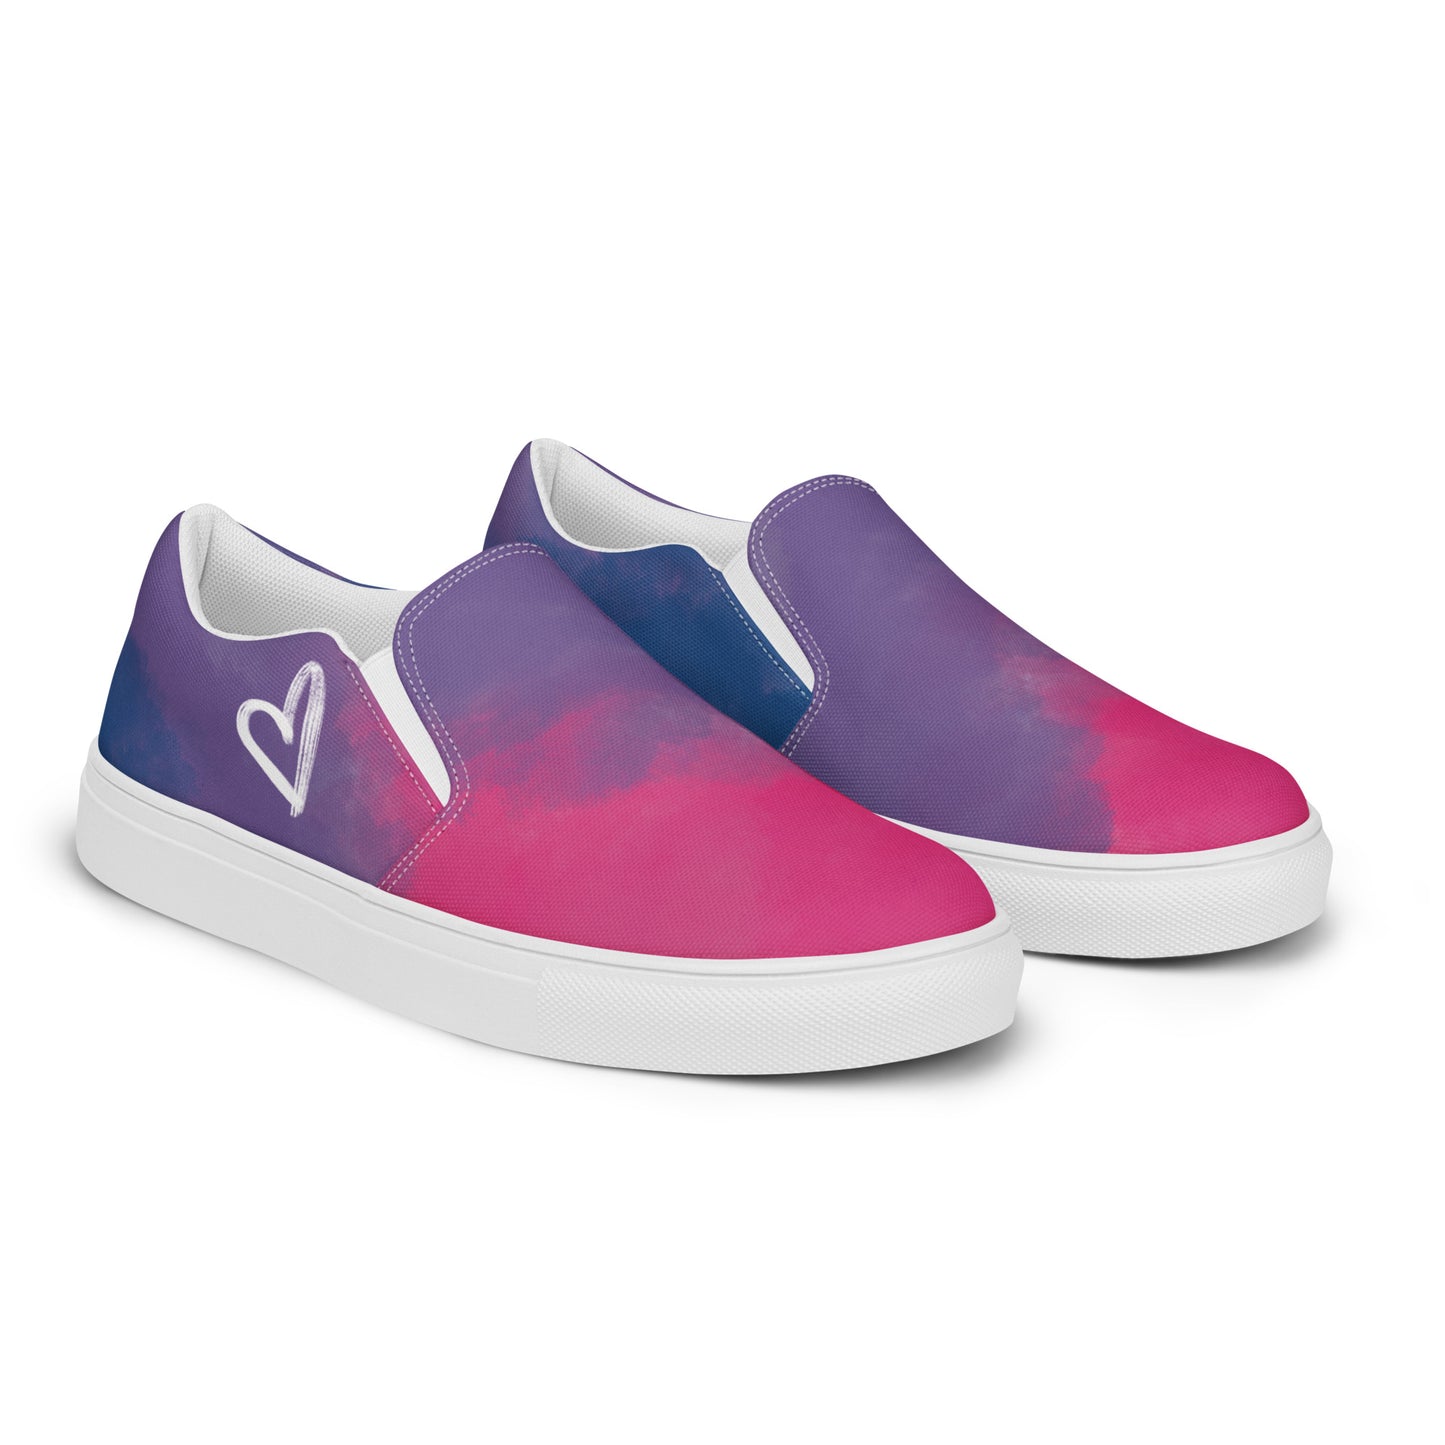 Right front view: A pair of slip on shoes with color block pink, purple, and blue clouds, a white hand drawn heart, and the Aras Sivad logo on the back.